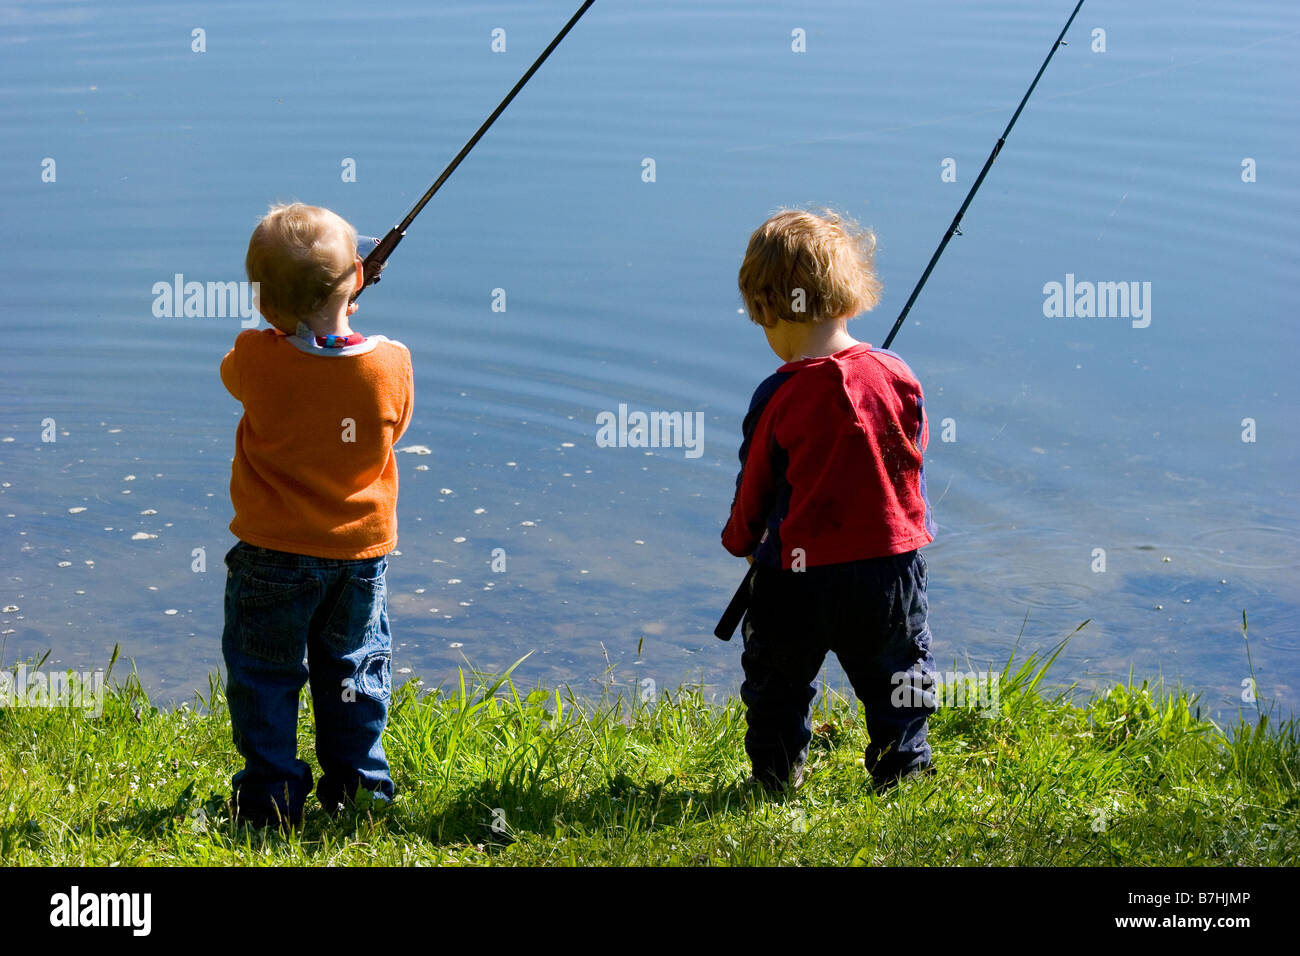 Two young boys fishing in a pond during a fishing derby Stock